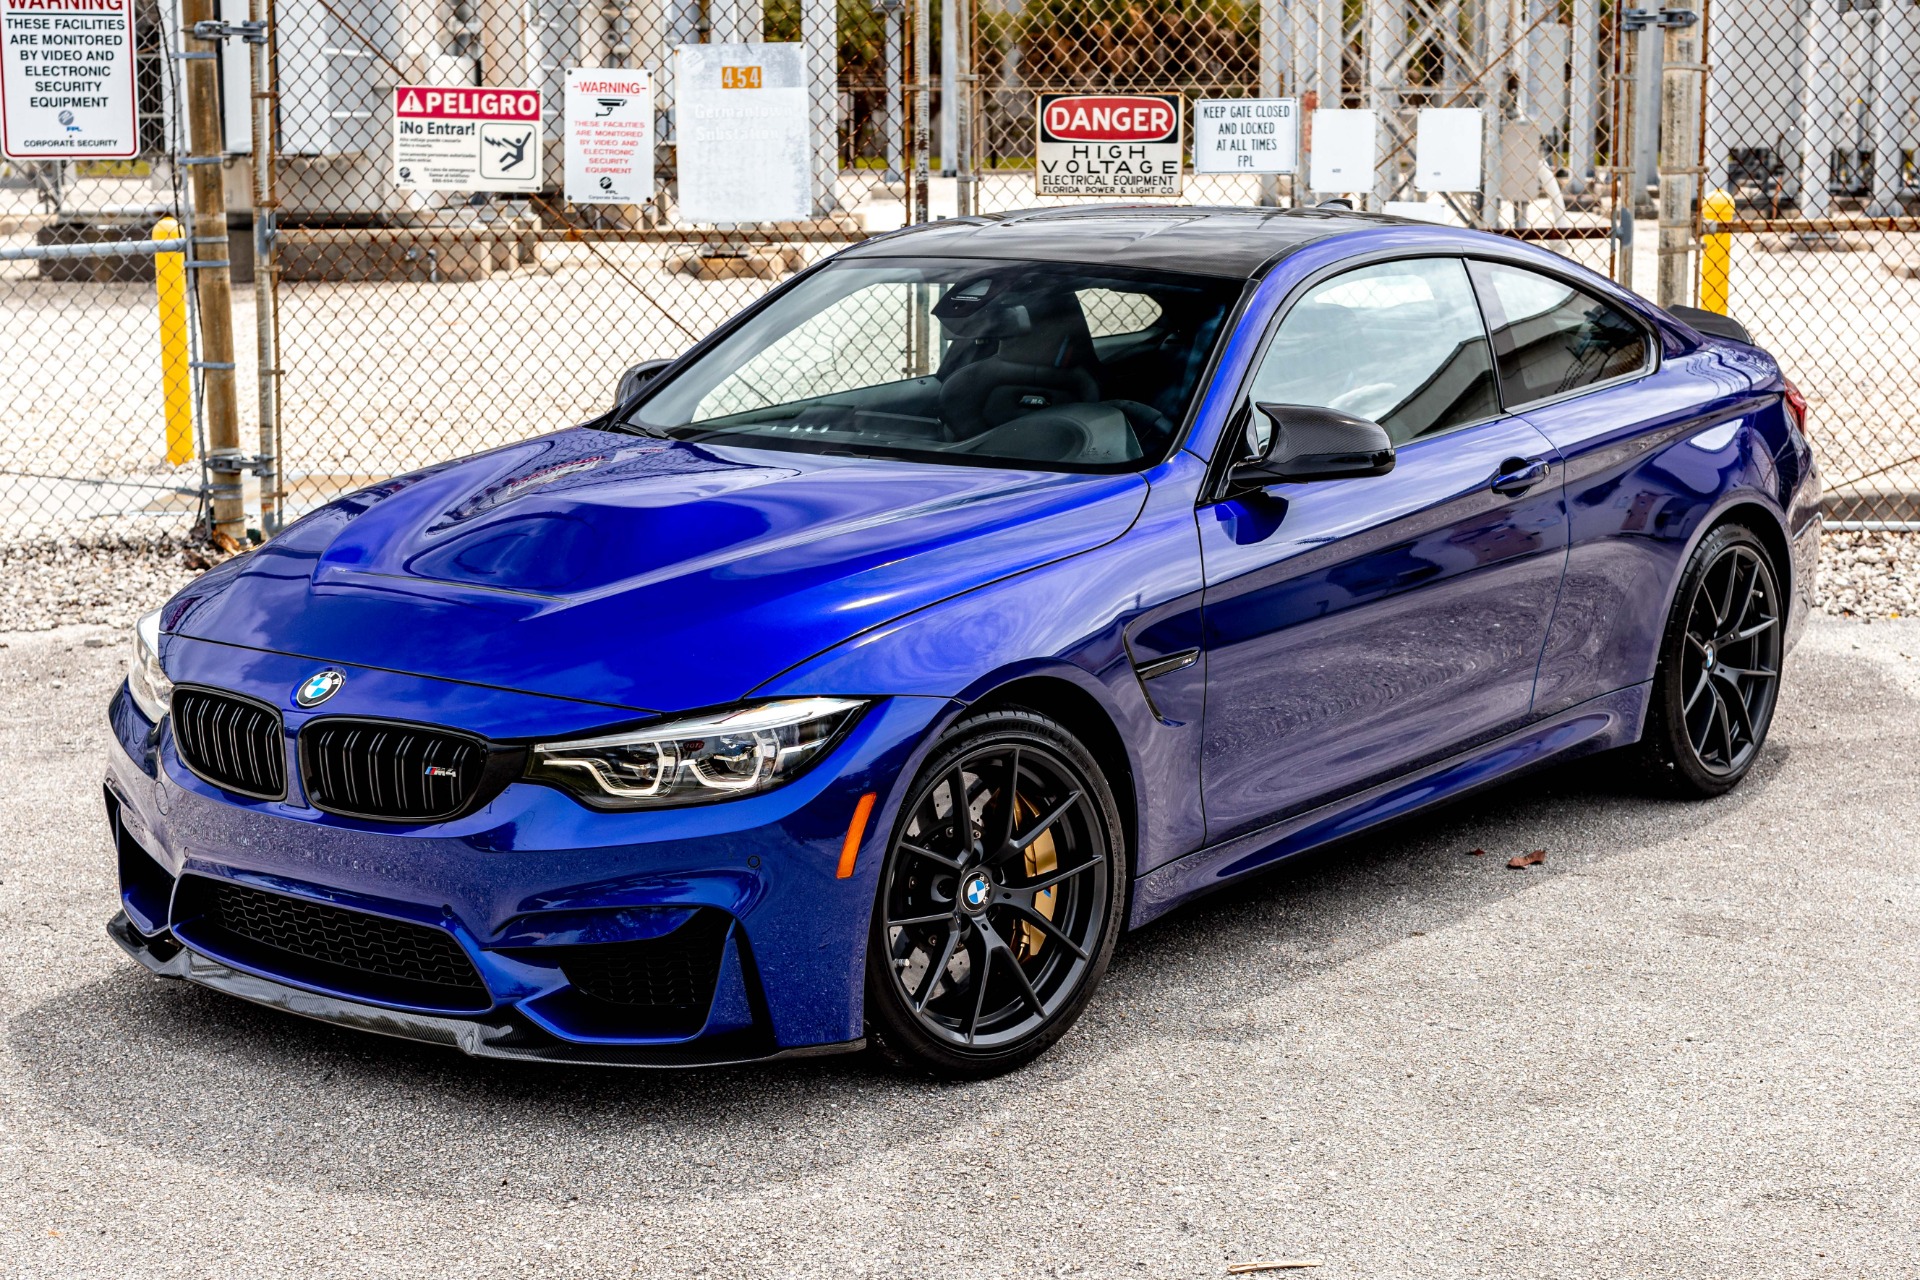 Used 2019 Bmw M4 Cs Cpo, Front End Ppf, Ccbs, Executive Pack For Sale  (Sold) | Exotics Hunter Stock #22189